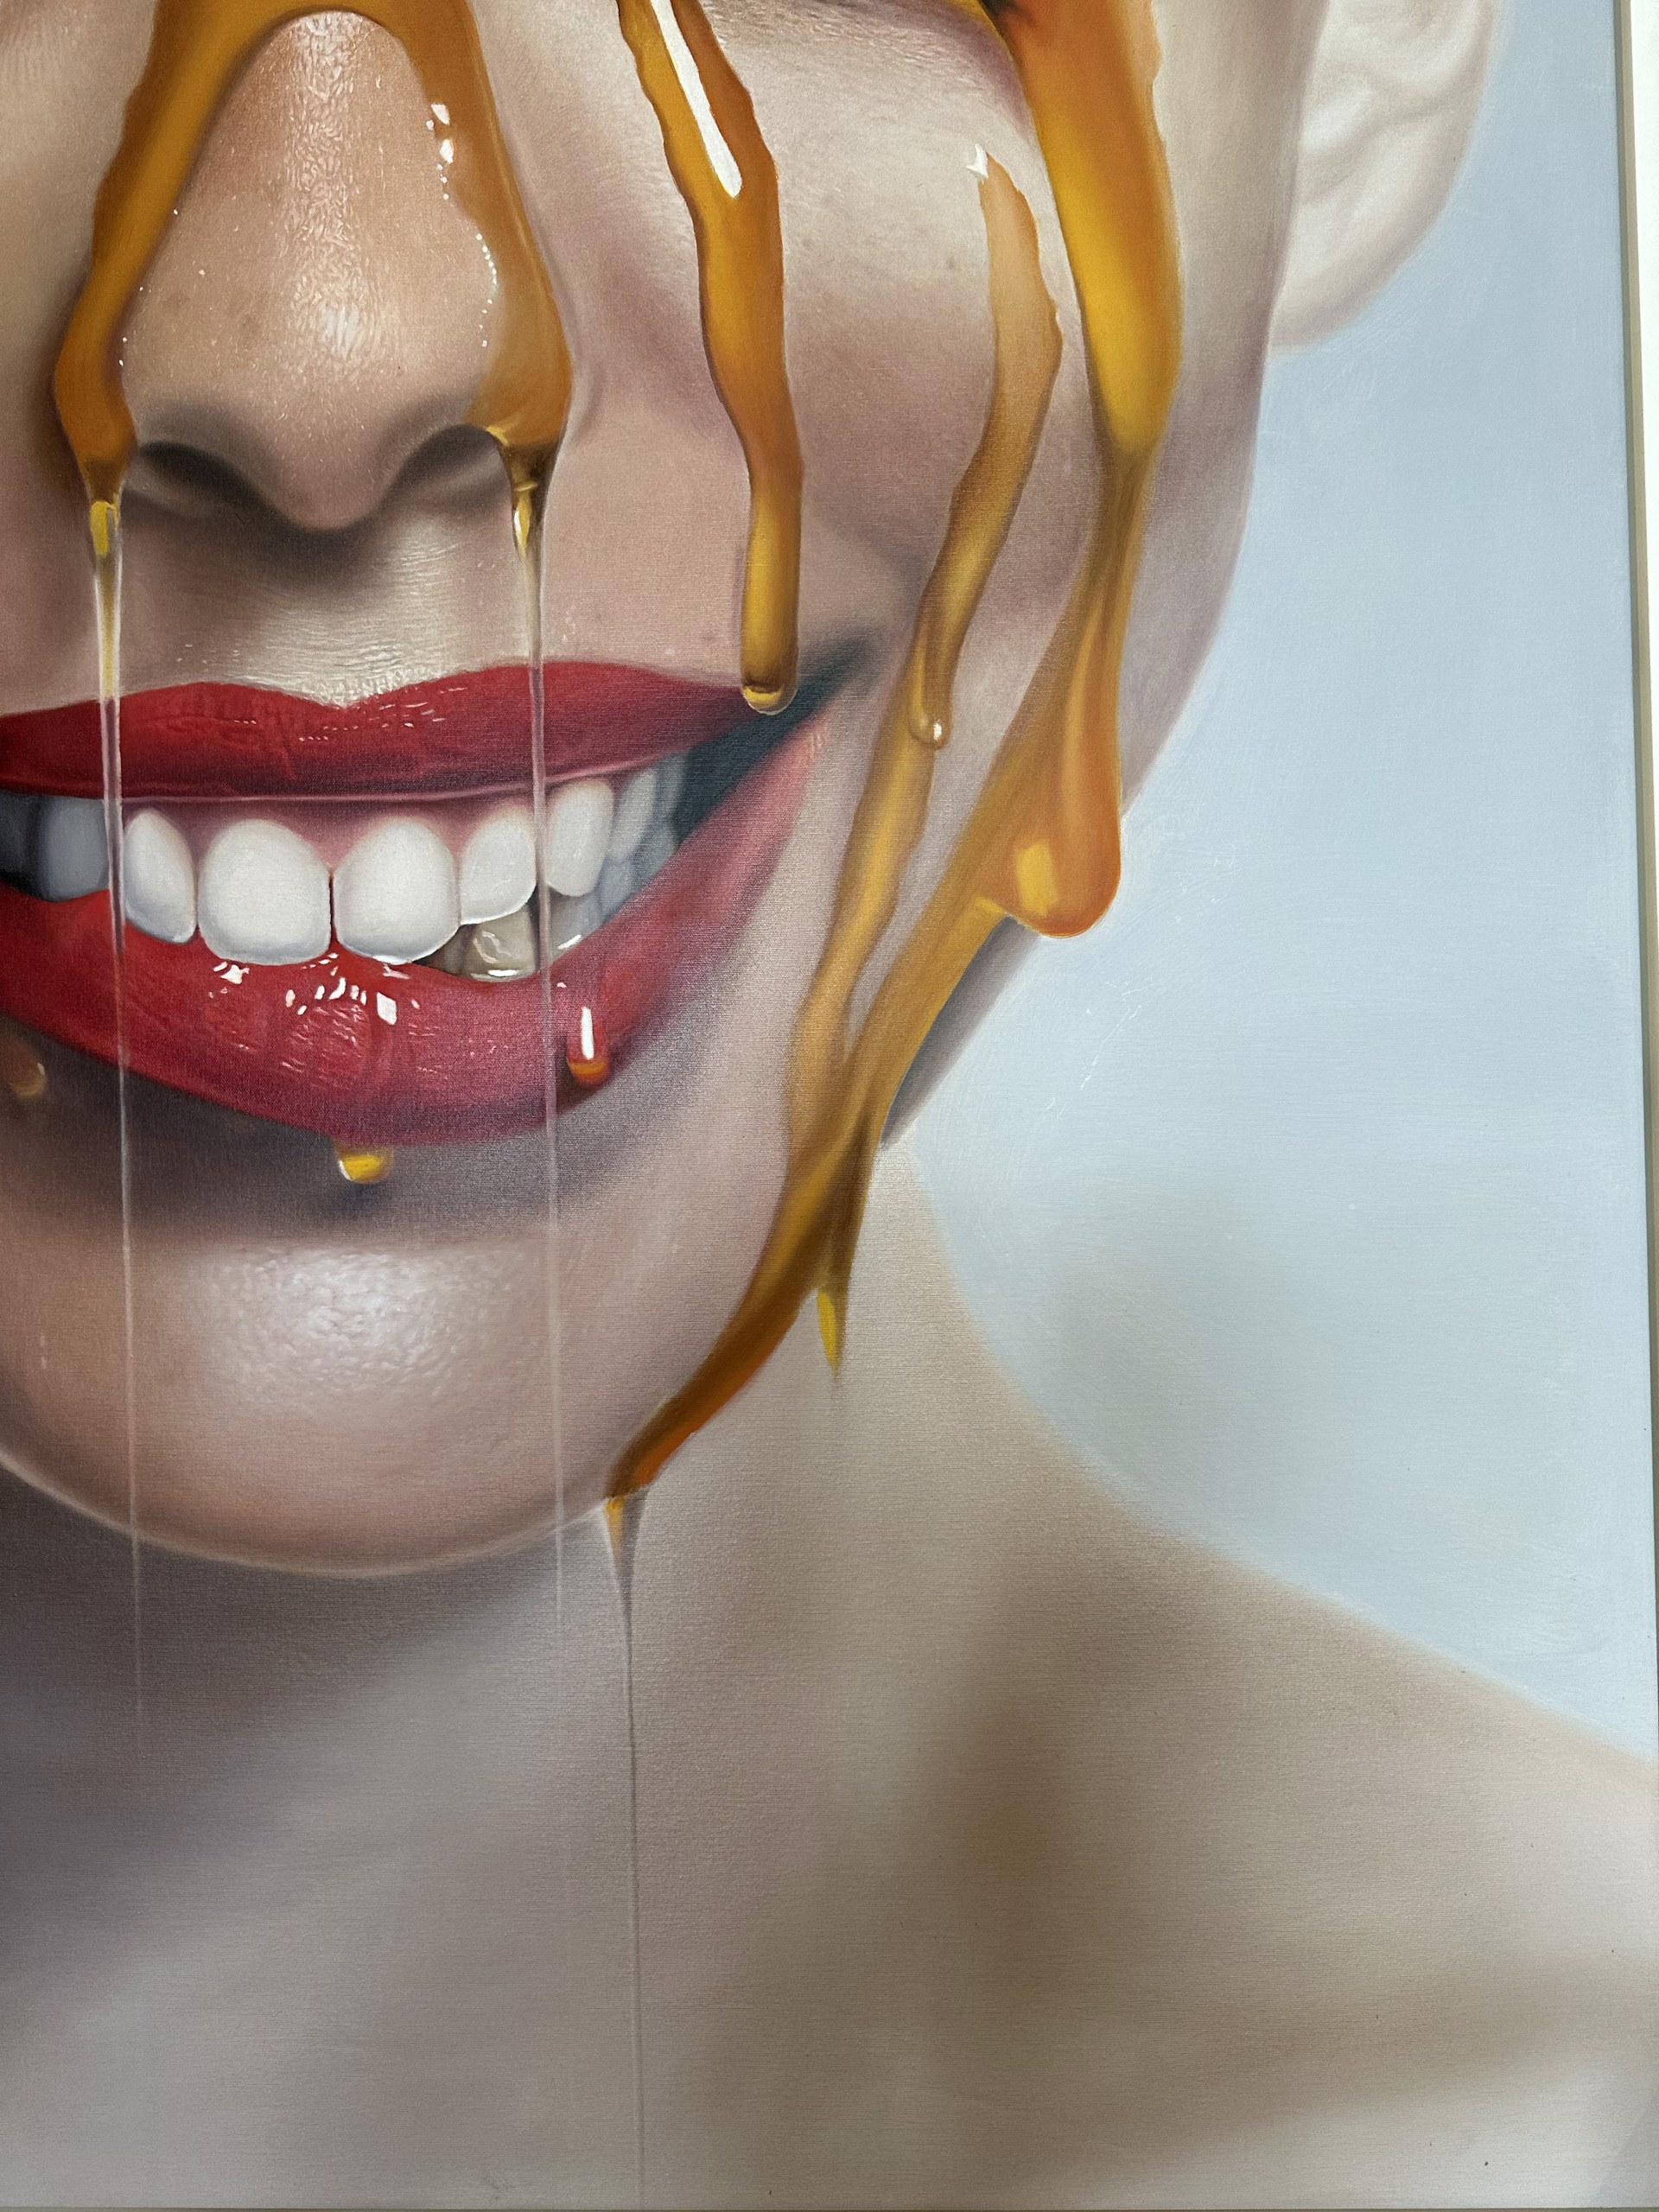 Sweet Satisfaction by Mike Dargas